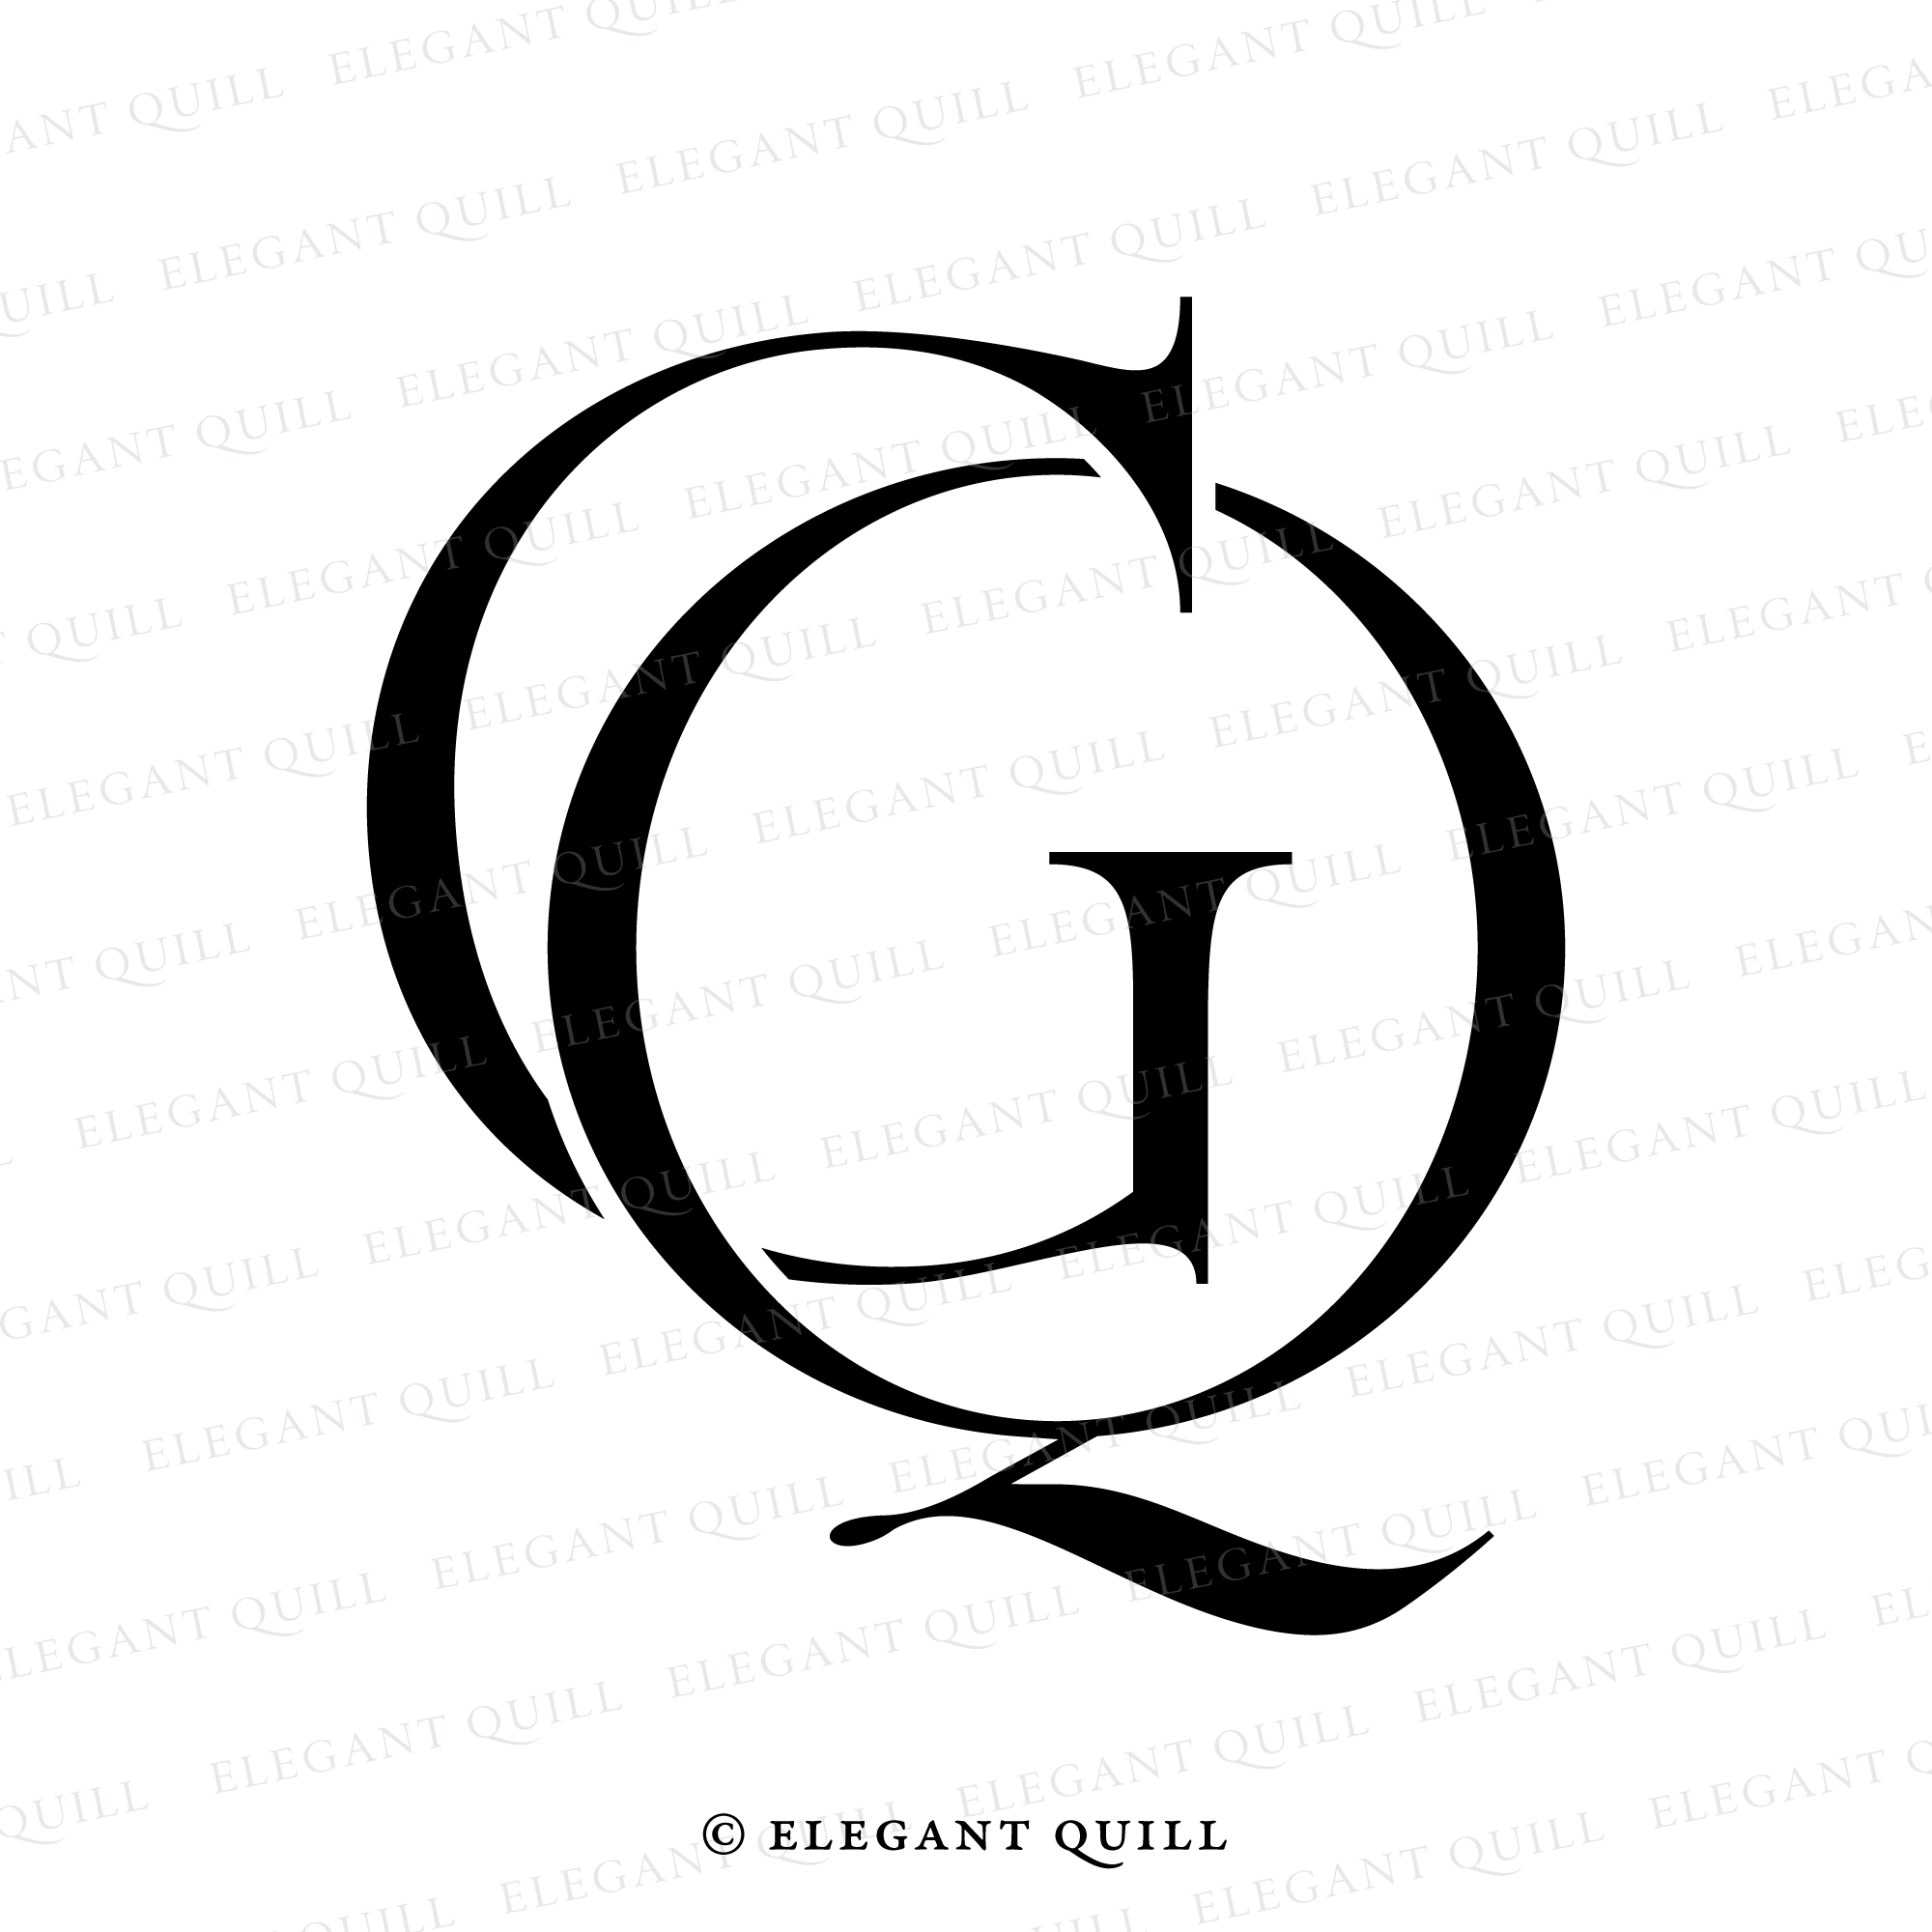 Professional GQ Letter Logo Design For Your Business - Brand Identity